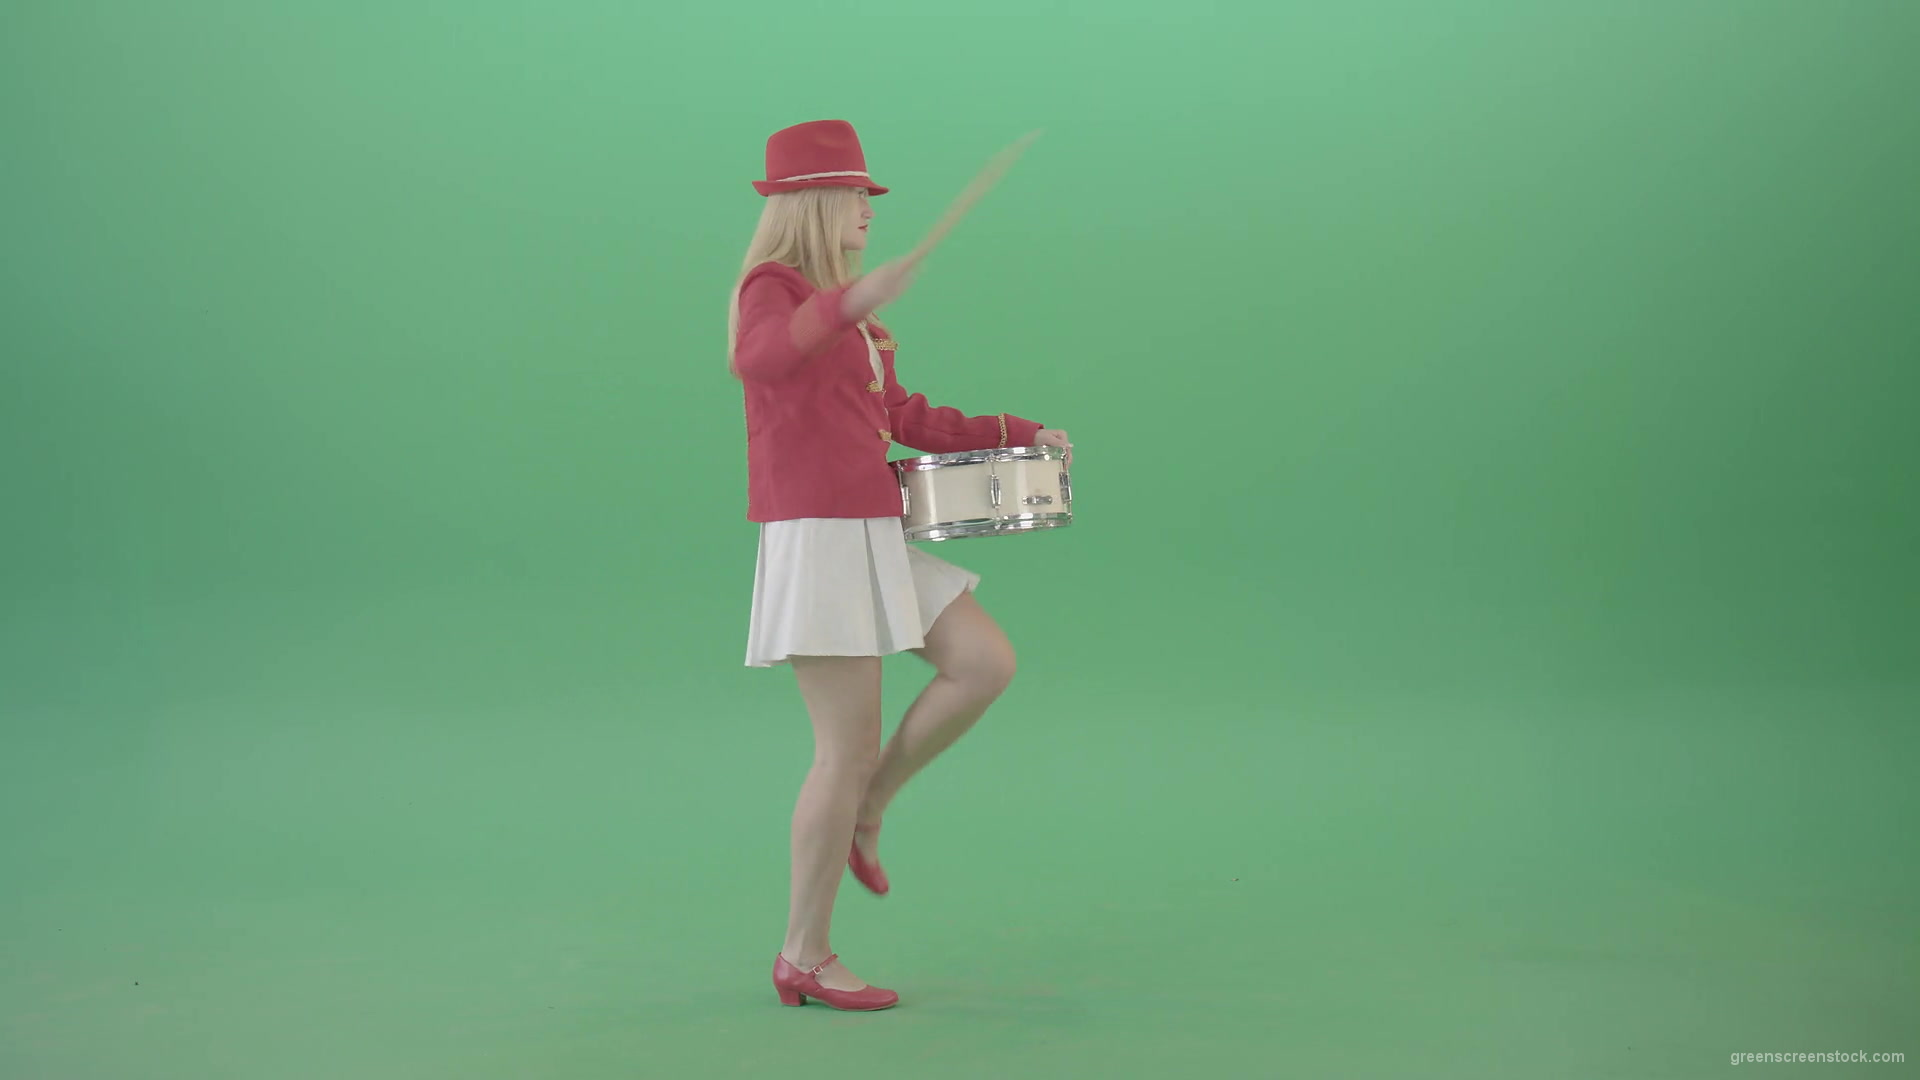 Side-view-marching-girl-play-white-snare-drum-in-red-uniform-on-green-screen-Video-Footage-1920_004 Green Screen Stock